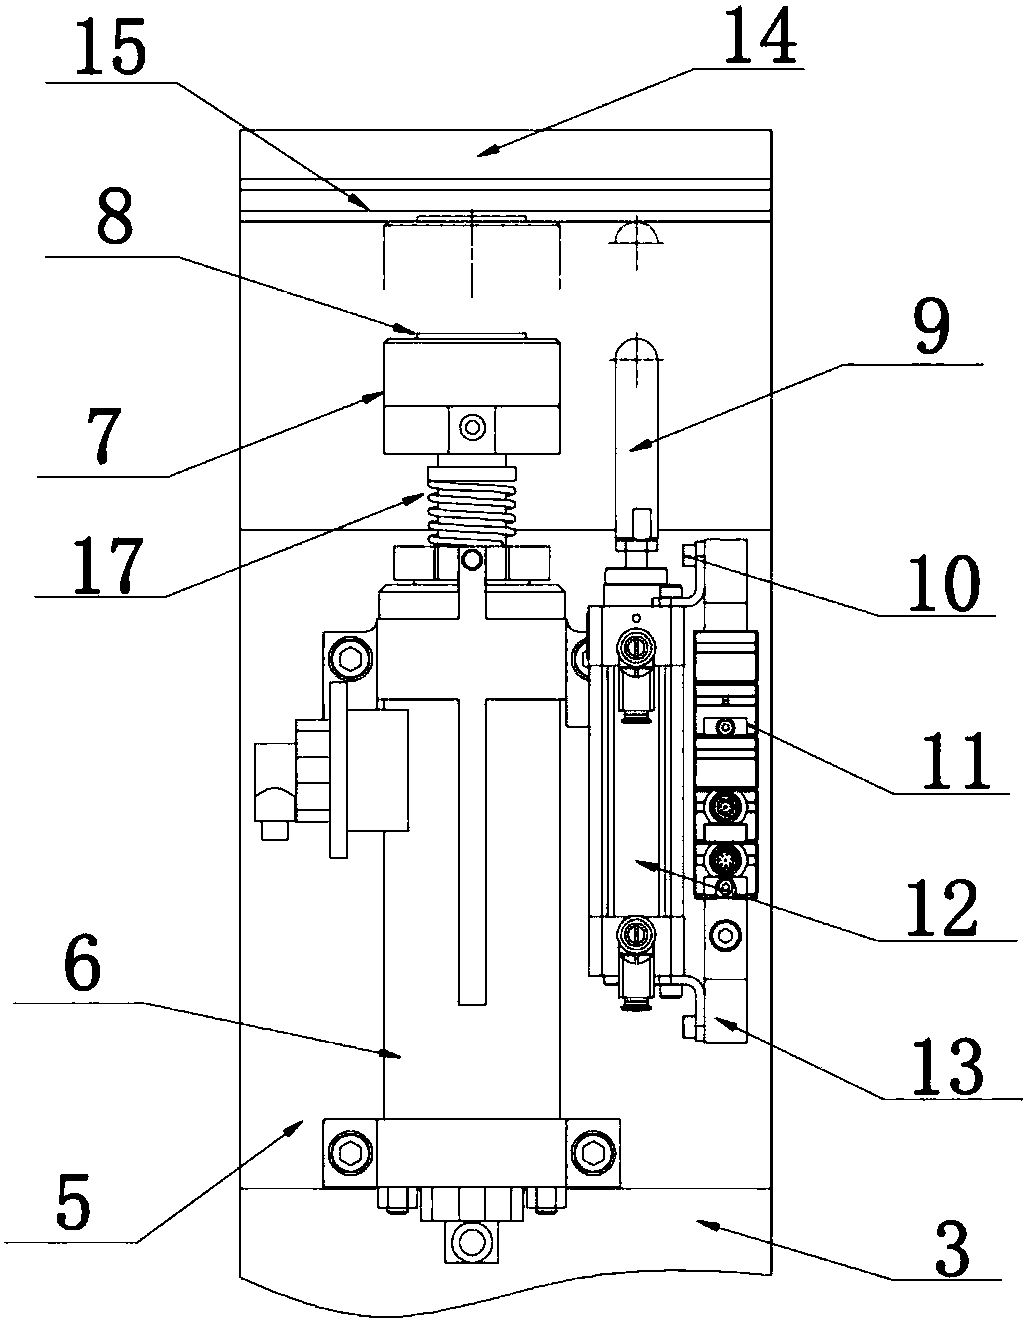 Reverse marking device for box-type furnace production line